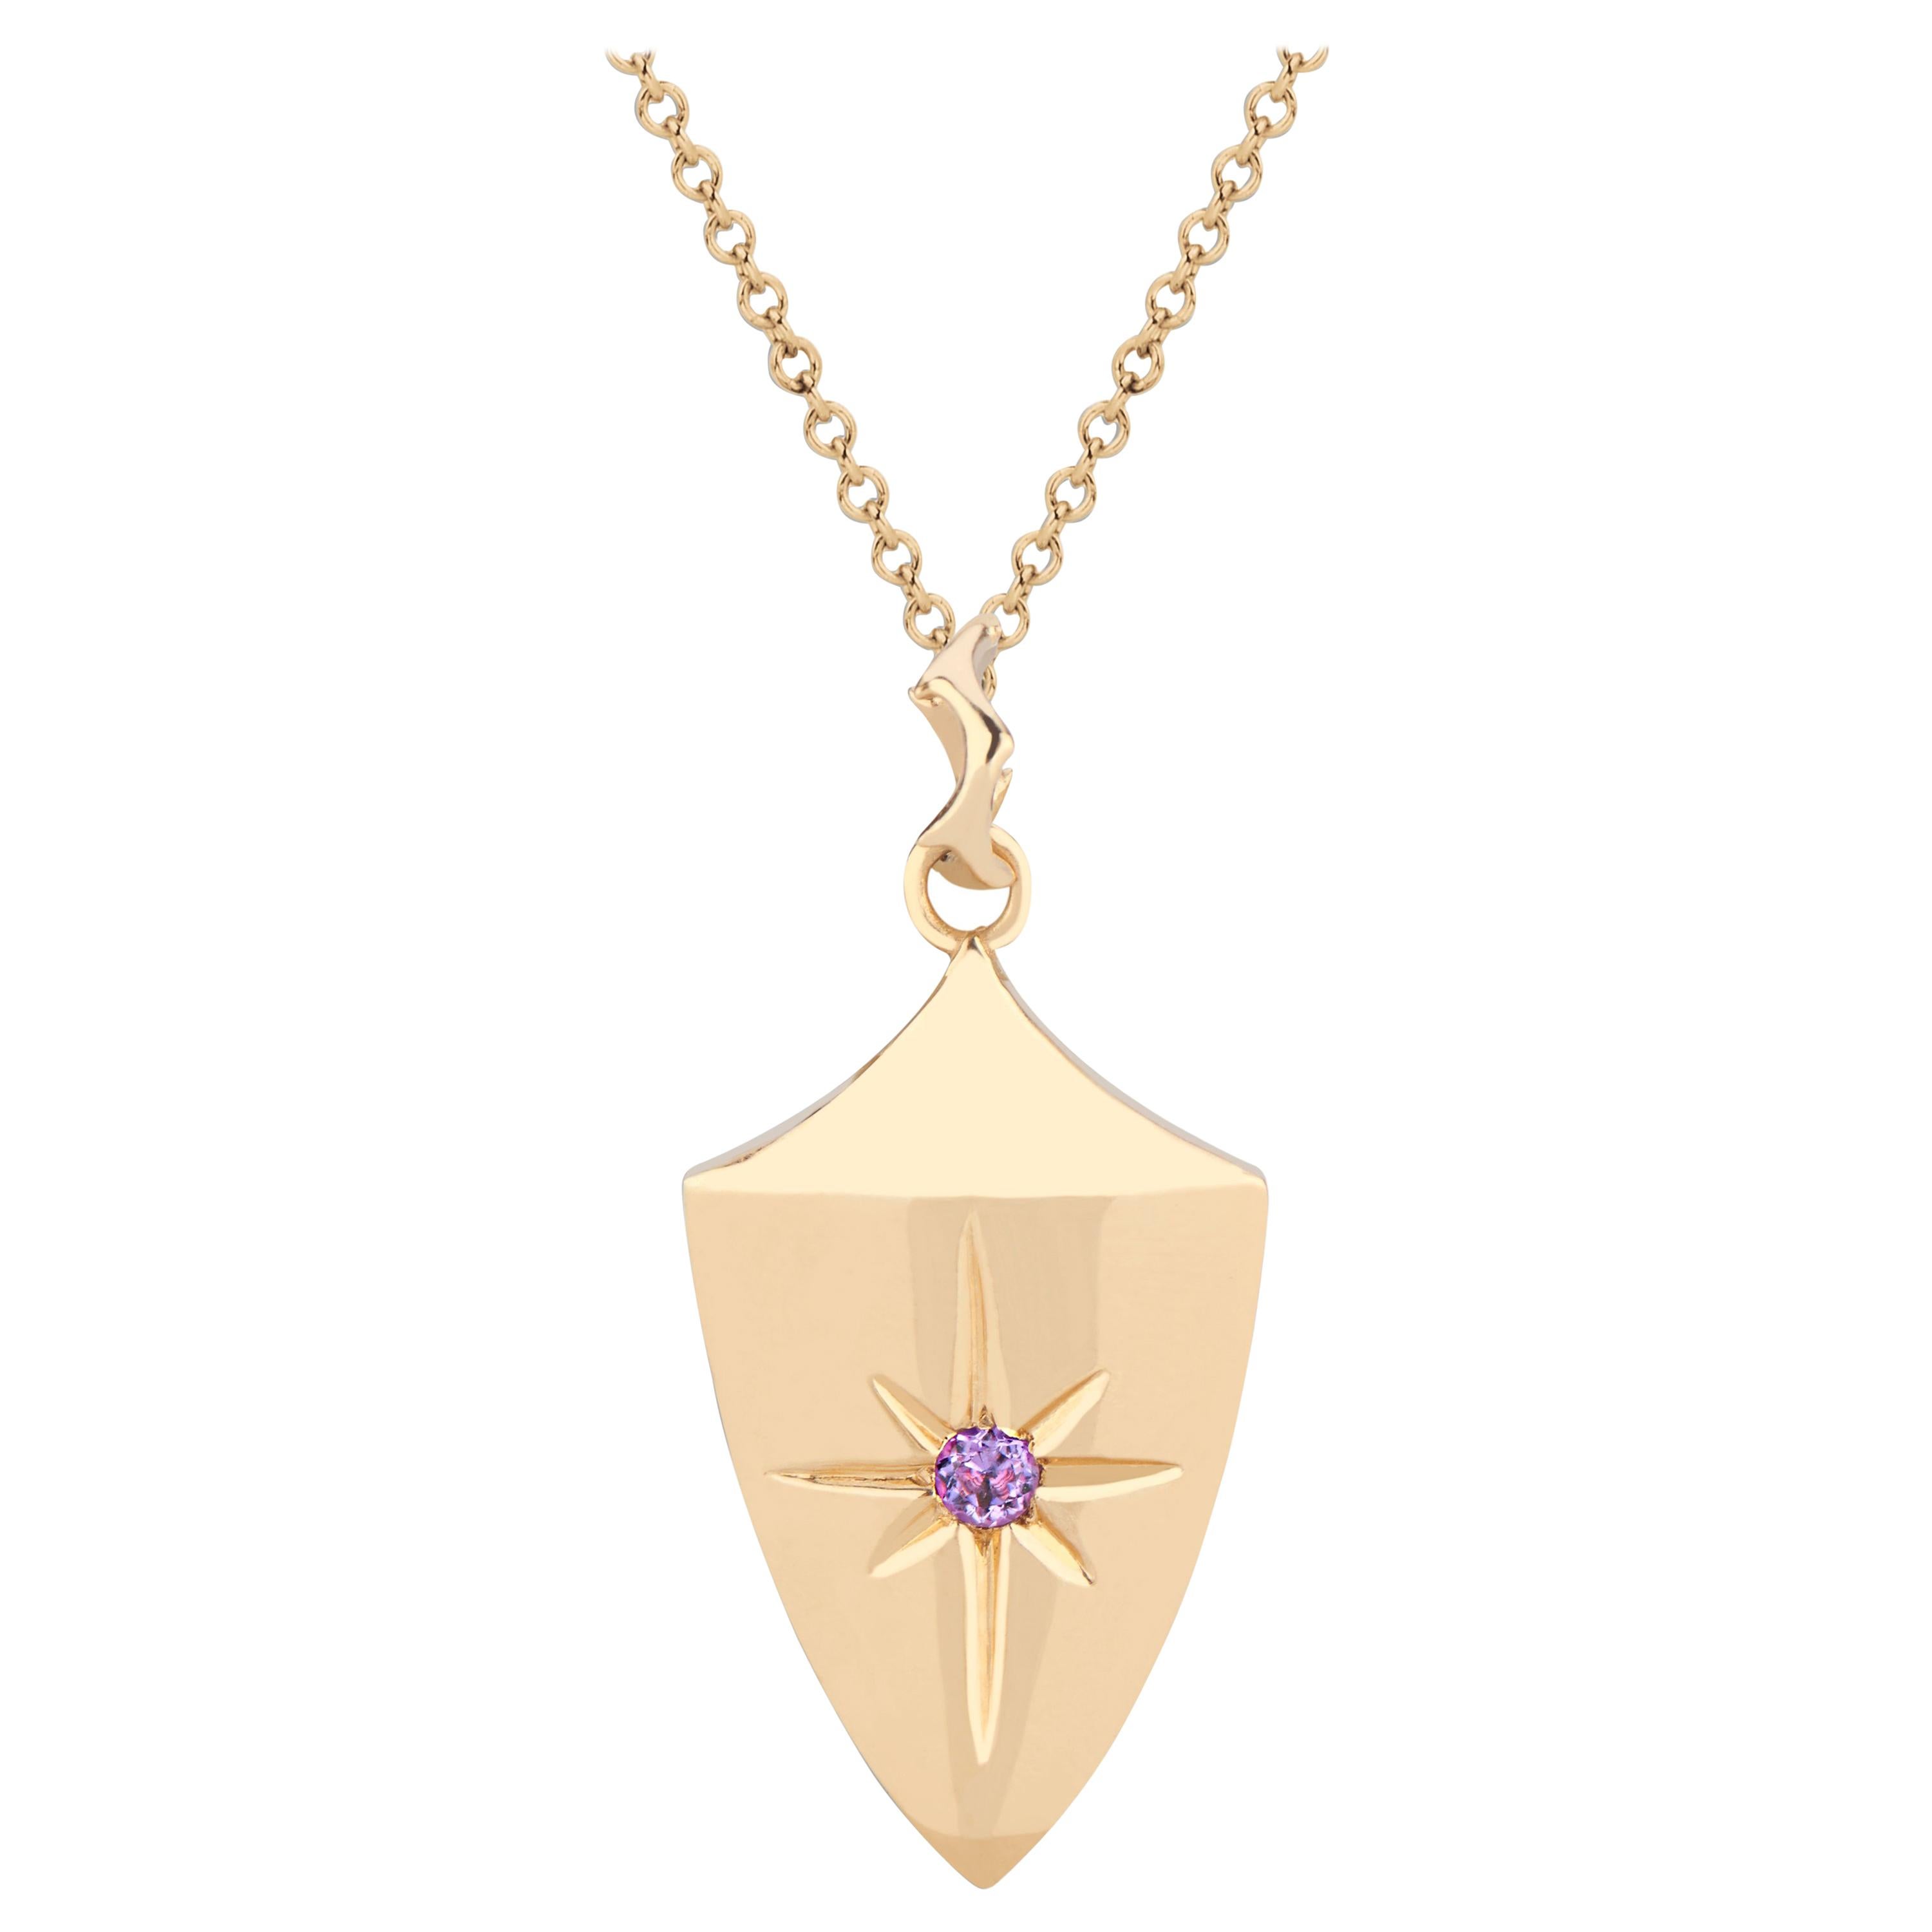 14 Karat Yellow Gold and Amethyst Hand-Engraved Shield Pendant on Chain For Sale